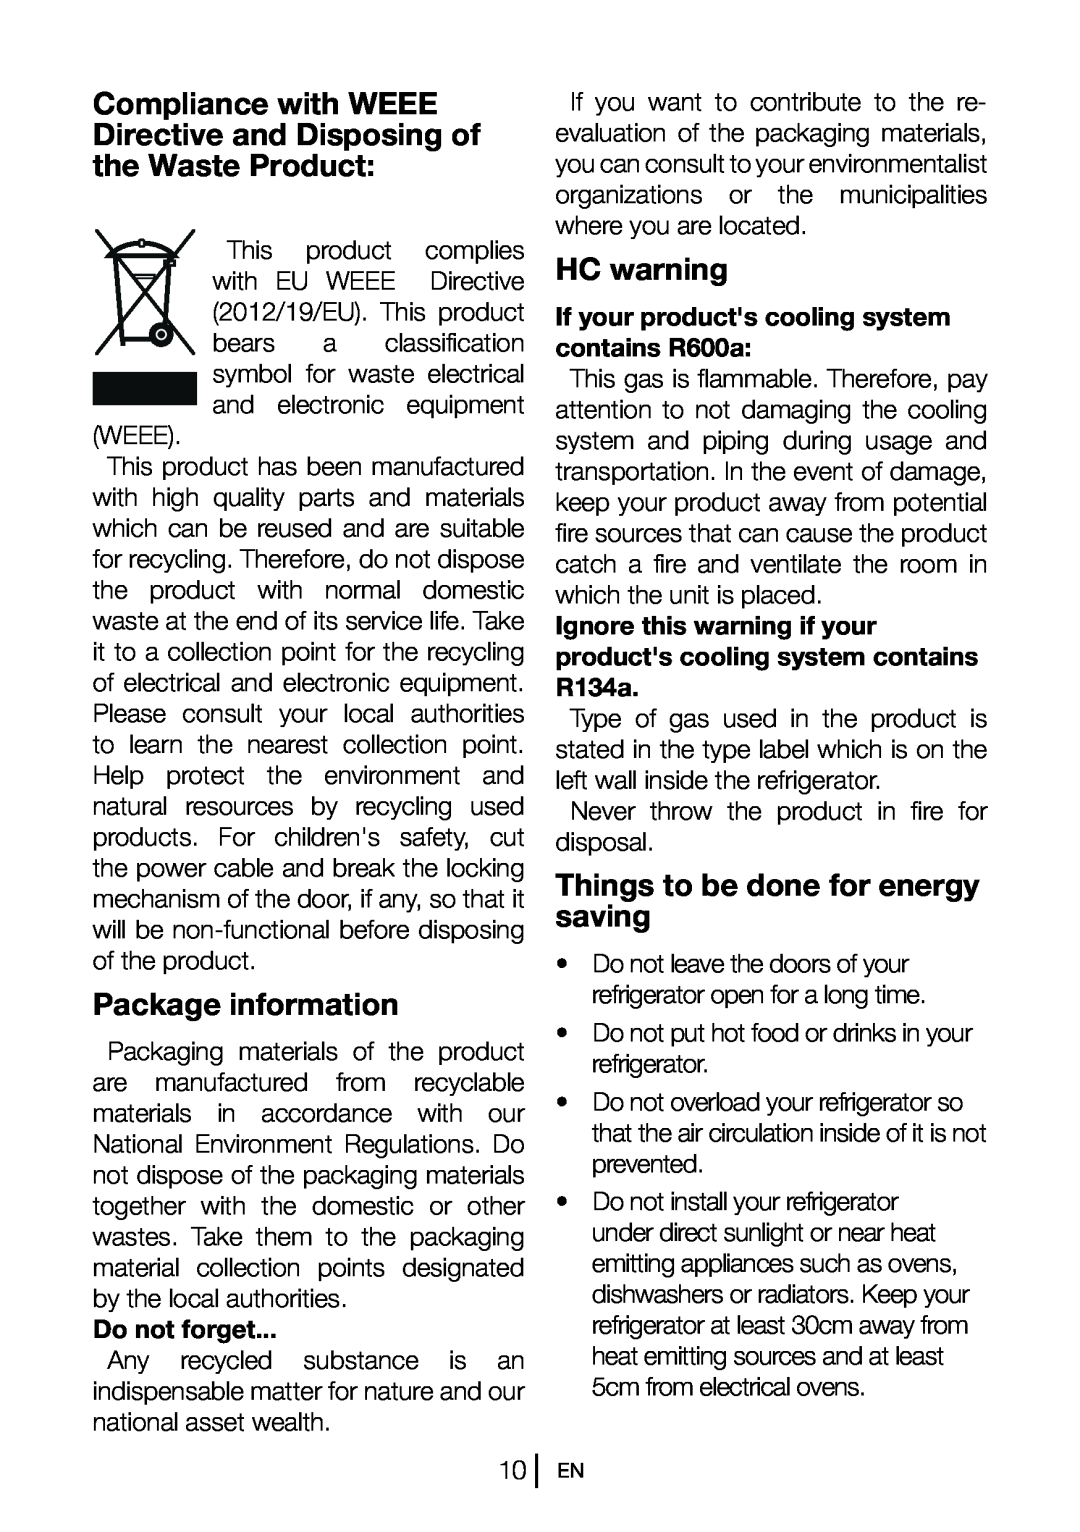 Beko FN 130430 manual Package information, HC warning, Things to be done for energy saving, Do not forget 